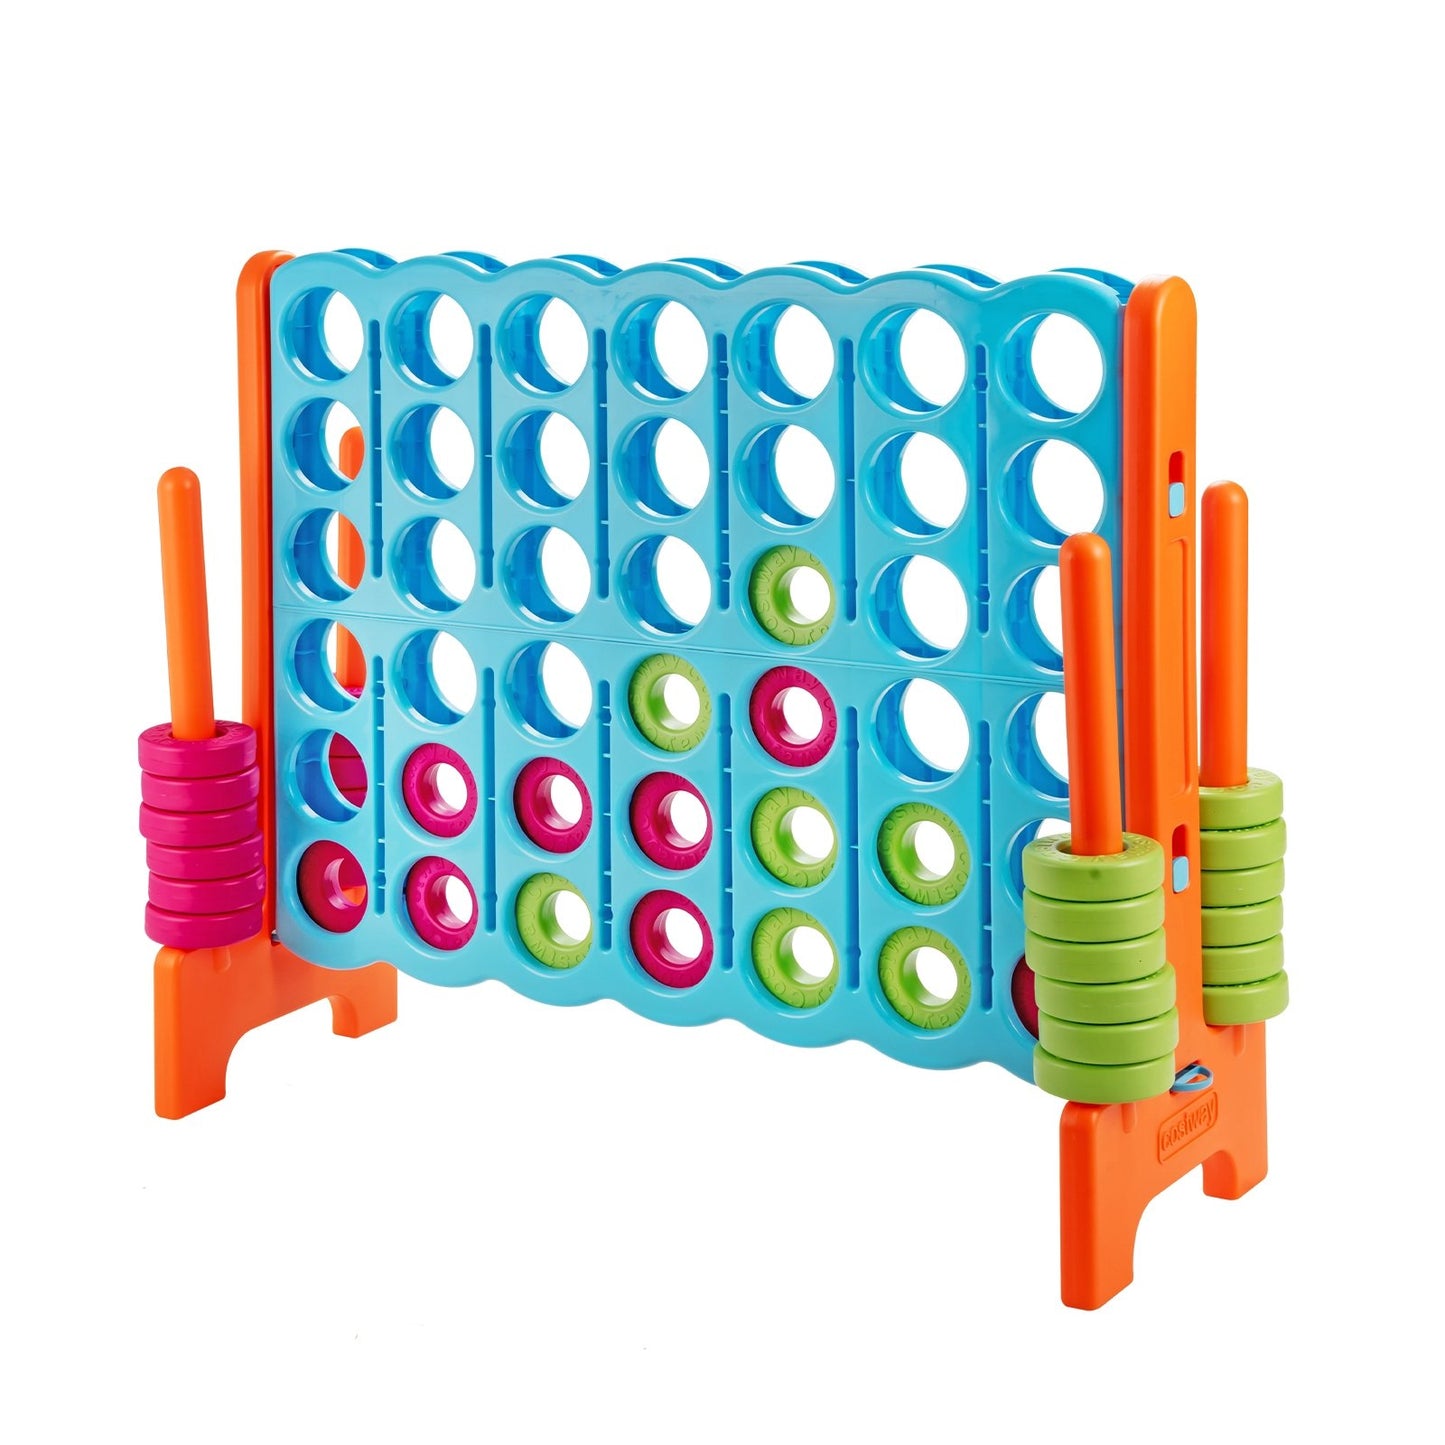 4 in A Row 4-to-Score Giant Jumbo Game Set for Family Party Holiday, Light Blue - Gallery Canada